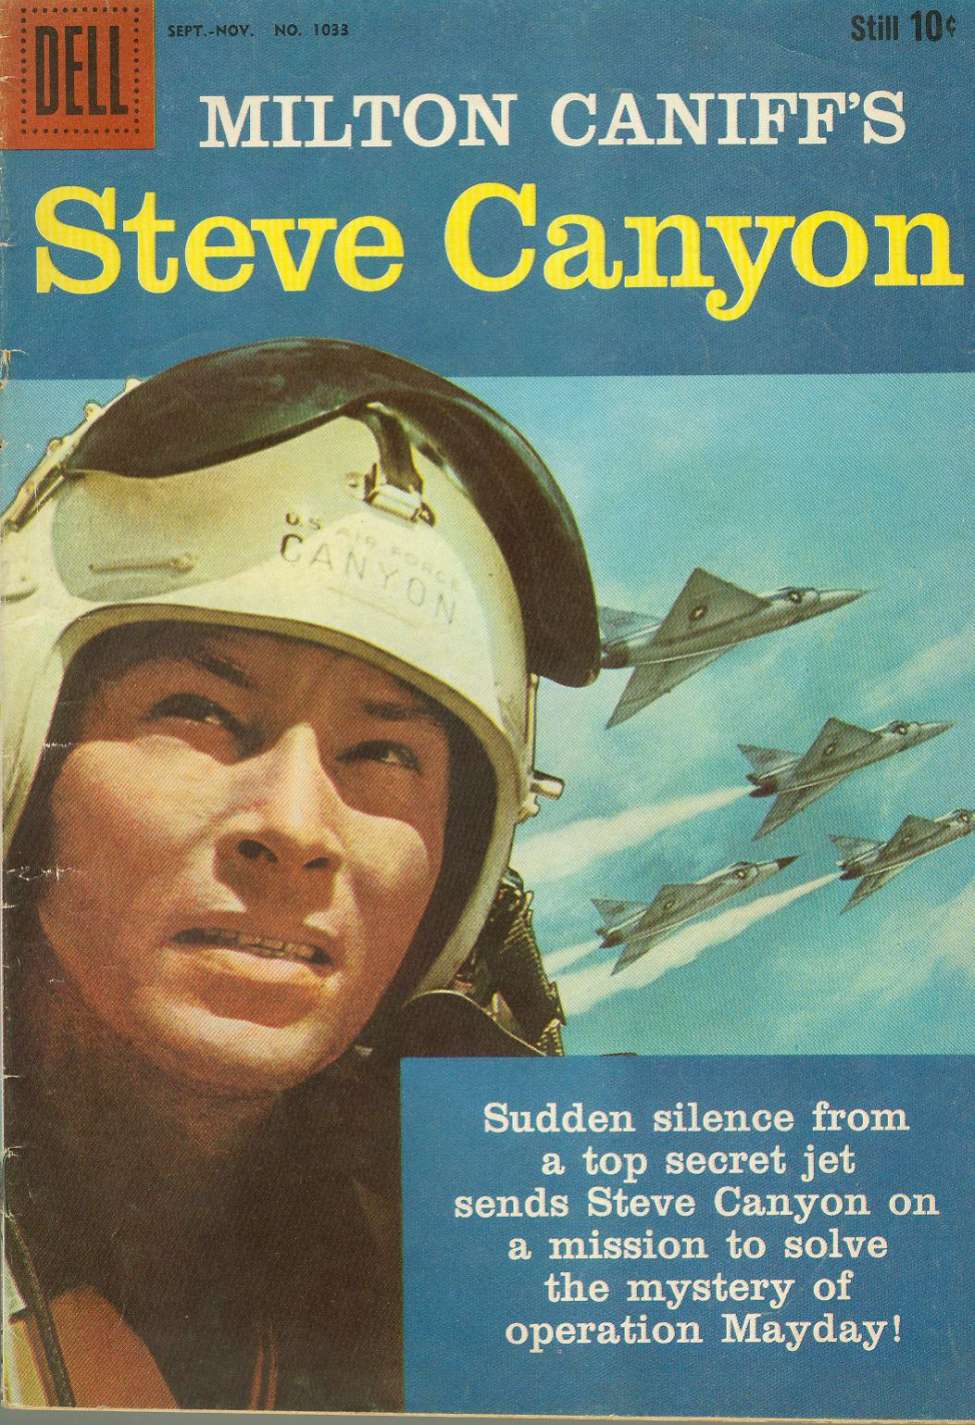 Book Cover For 1033 - Milton Caniff's Steve Canyon